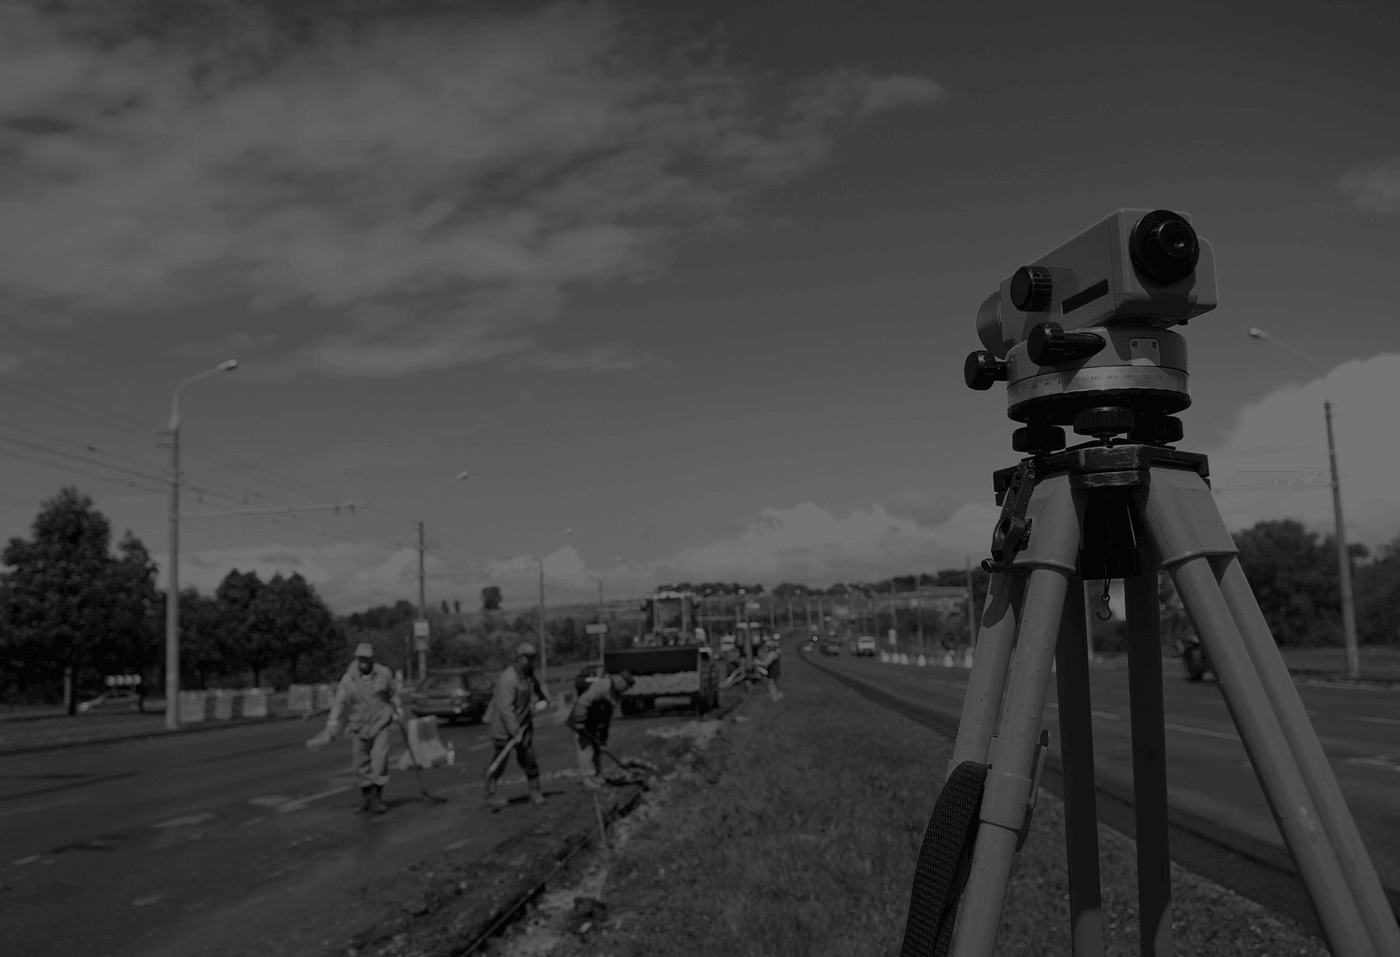 land survey equipment in black and white